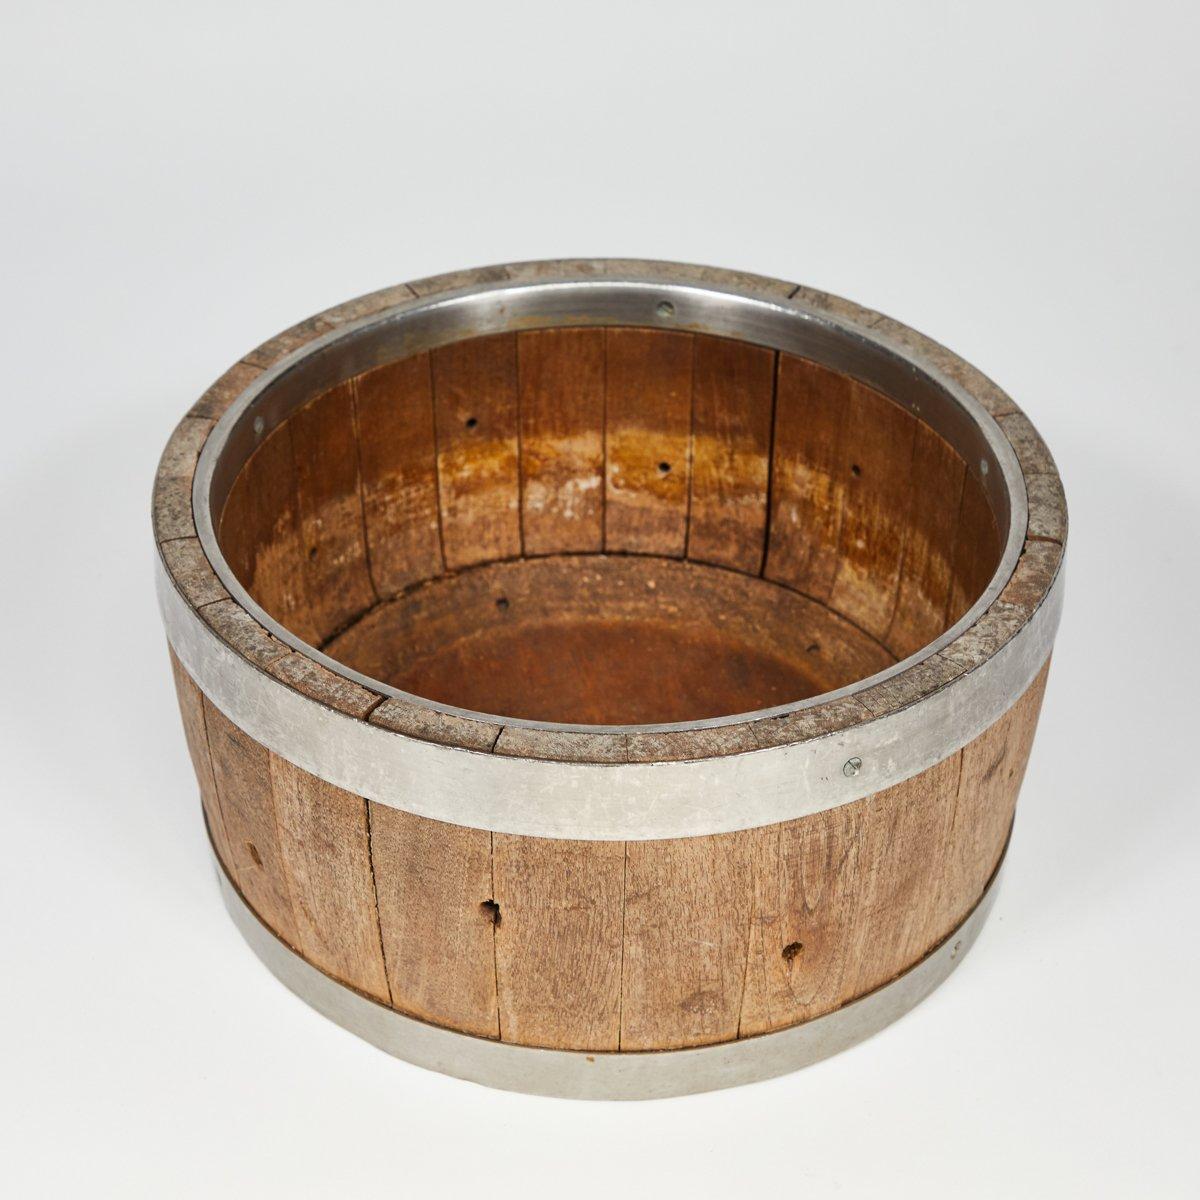 English Wooden Bowl with Metal Bands